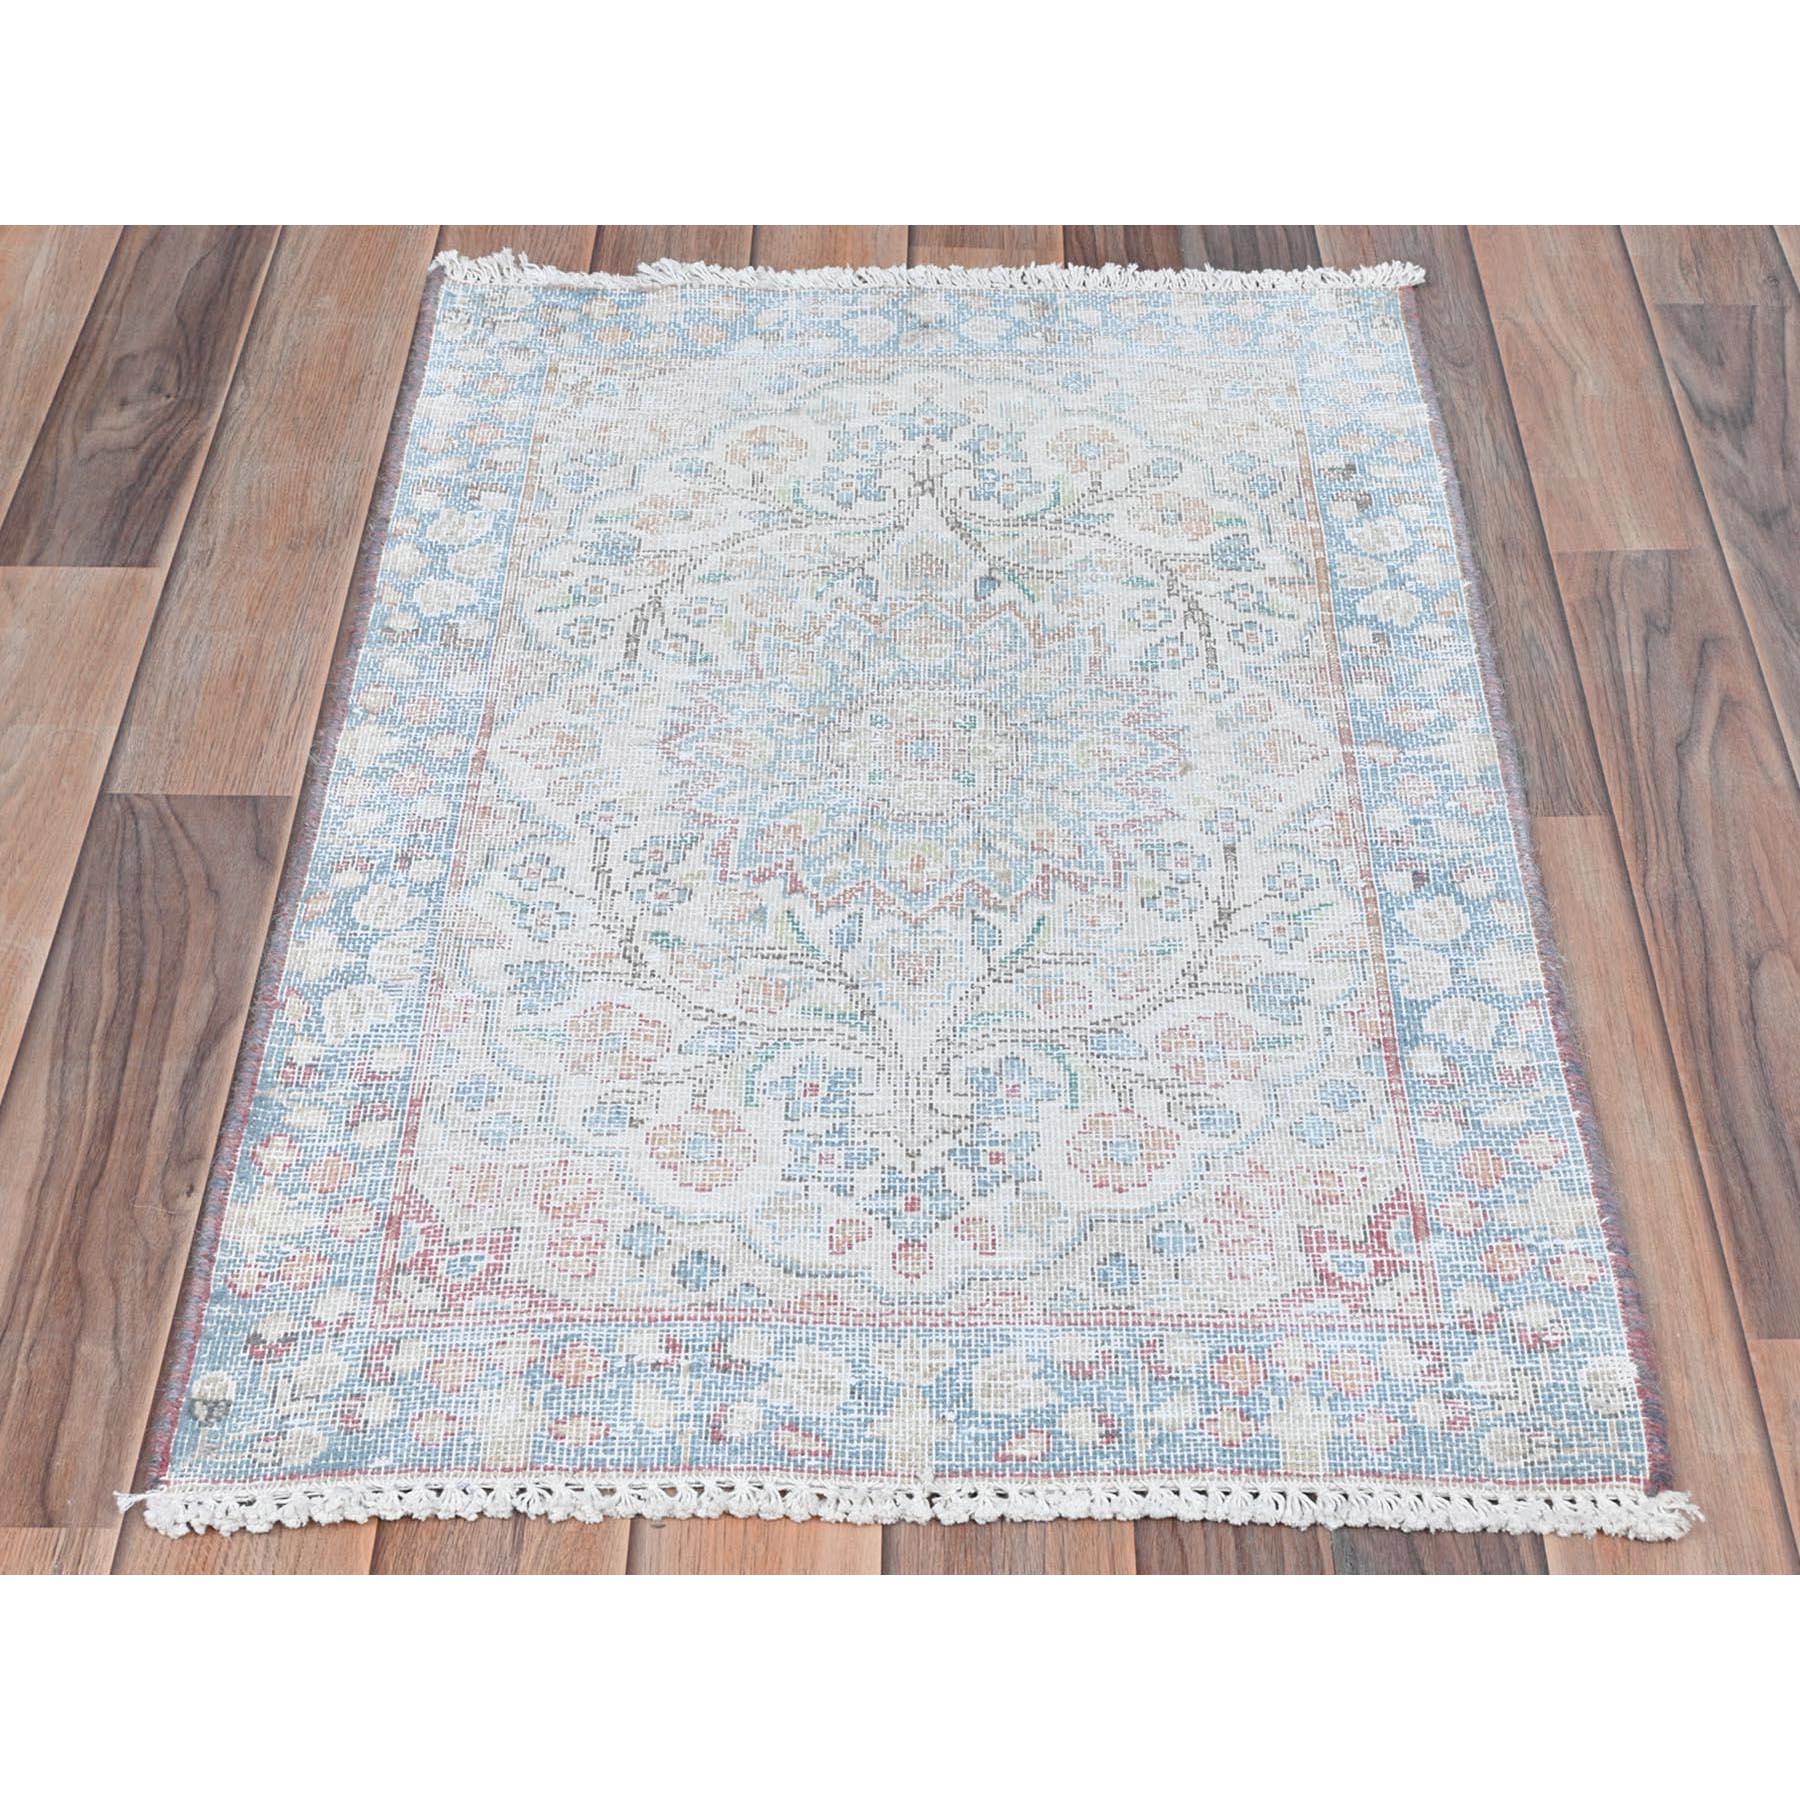 This fabulous hand-knotted carpet has been created and designed for extra strength and durability. This rug has been handcrafted for weeks in the traditional method that is used to make
Exact Rug Size in Feet and Inches : 2'0